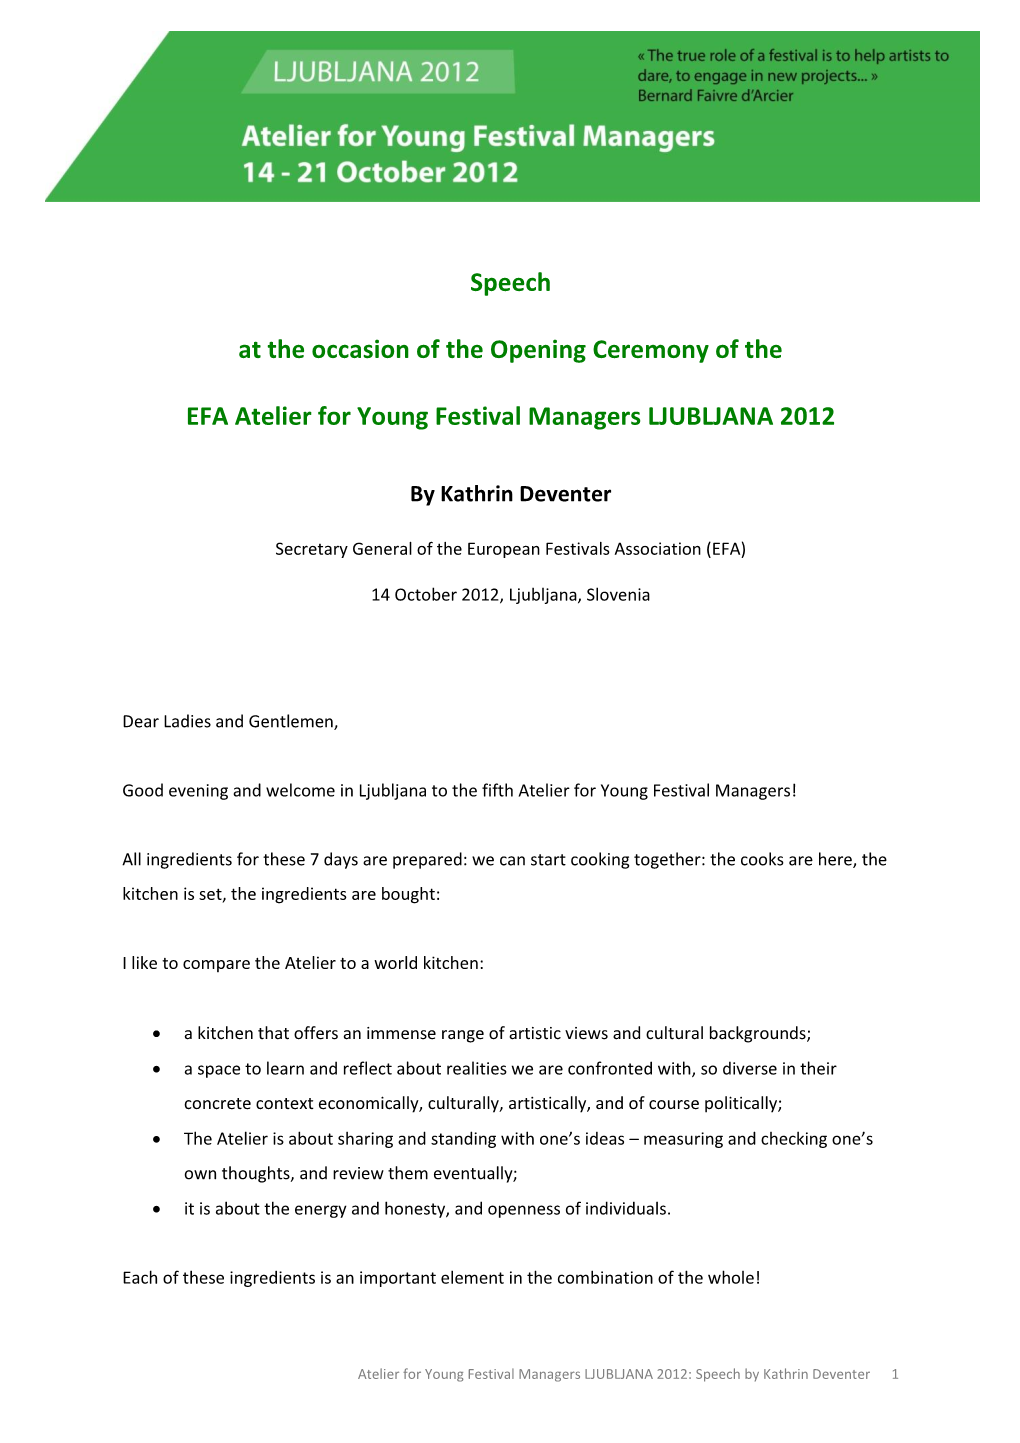 Speech at the Occasion of the Opening Ceremony of the EFA